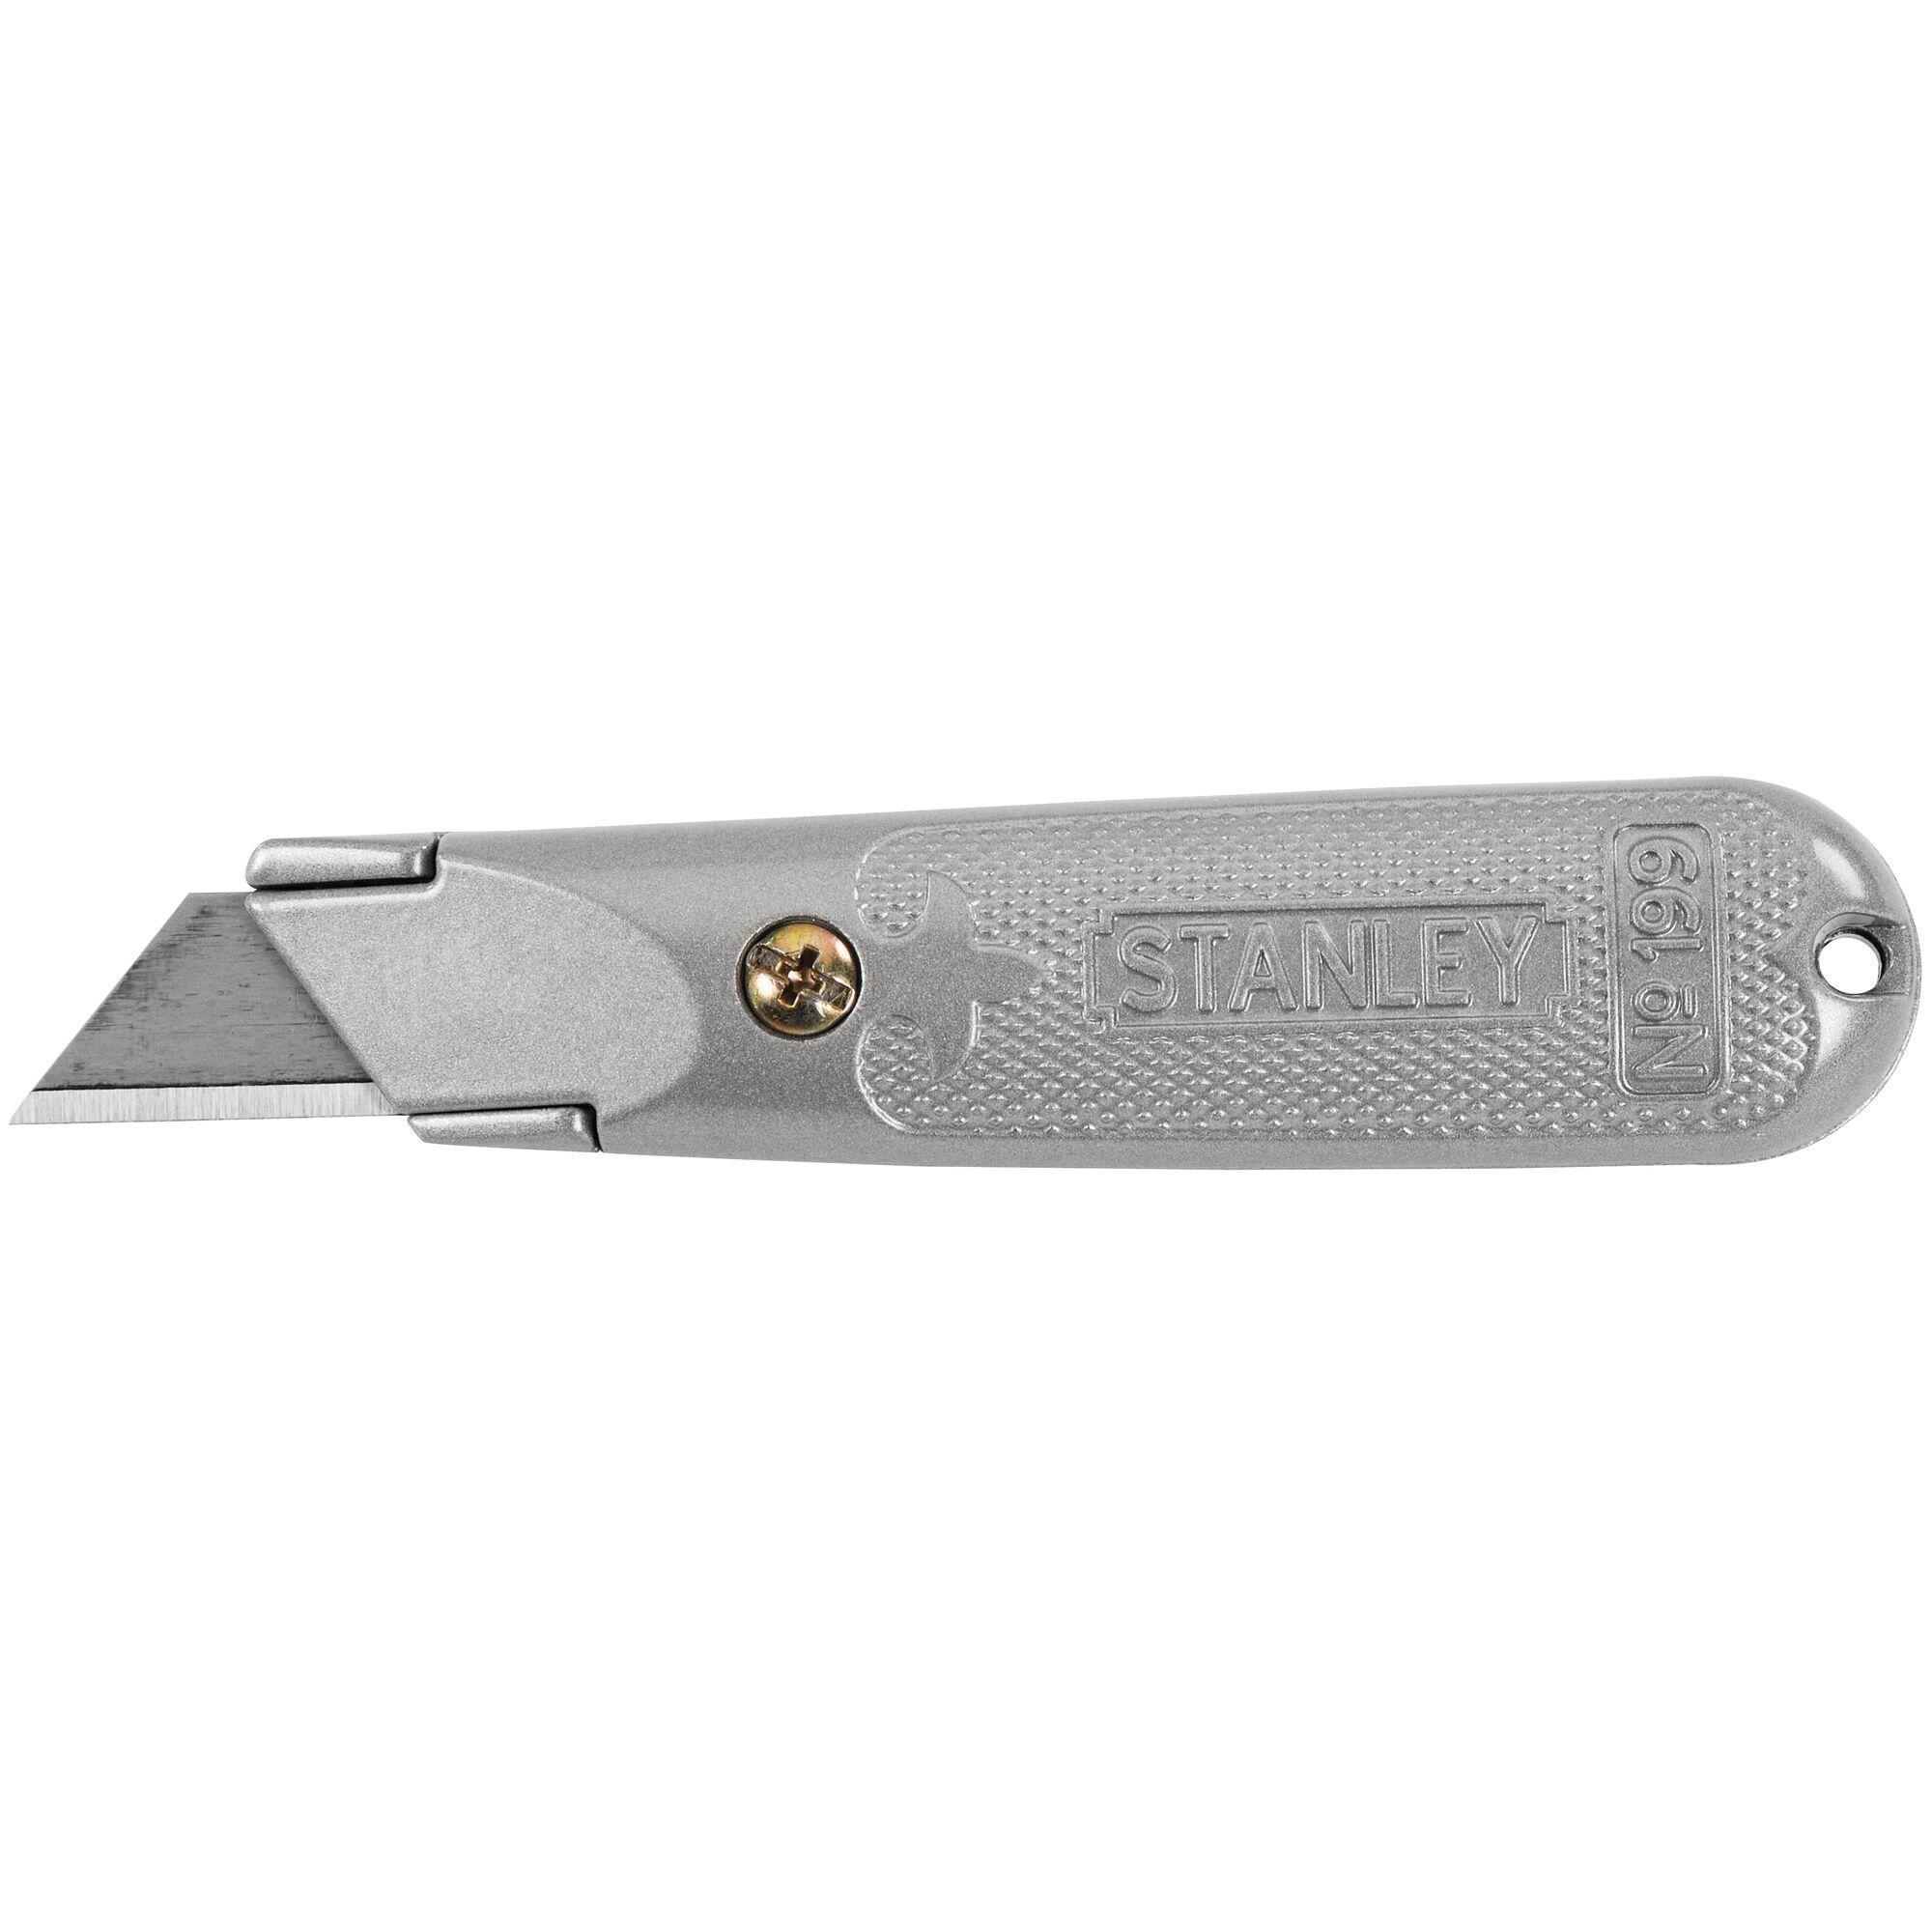 Stanley® 10-189C Safety Utility Knife, Spring Loaded/Self-Retracting Blade, 1 Blade Included, Steel Blade, 5-7/8 in OAL